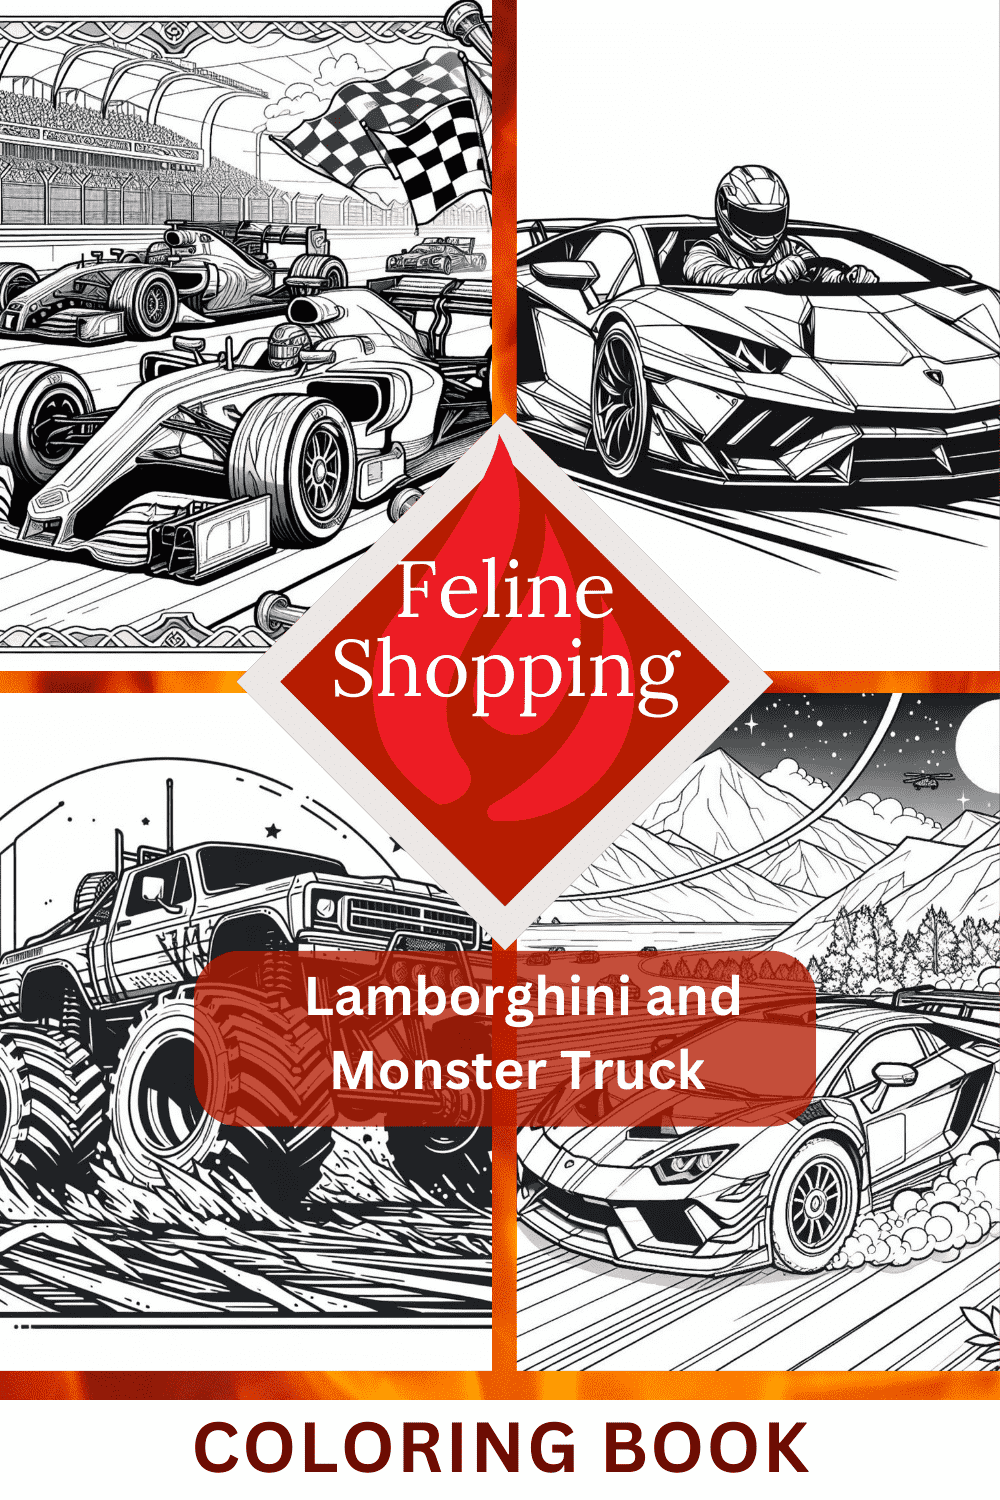 15 Lamborghini and Monster Truck Coloring pages in just 10$ pinterest preview image.